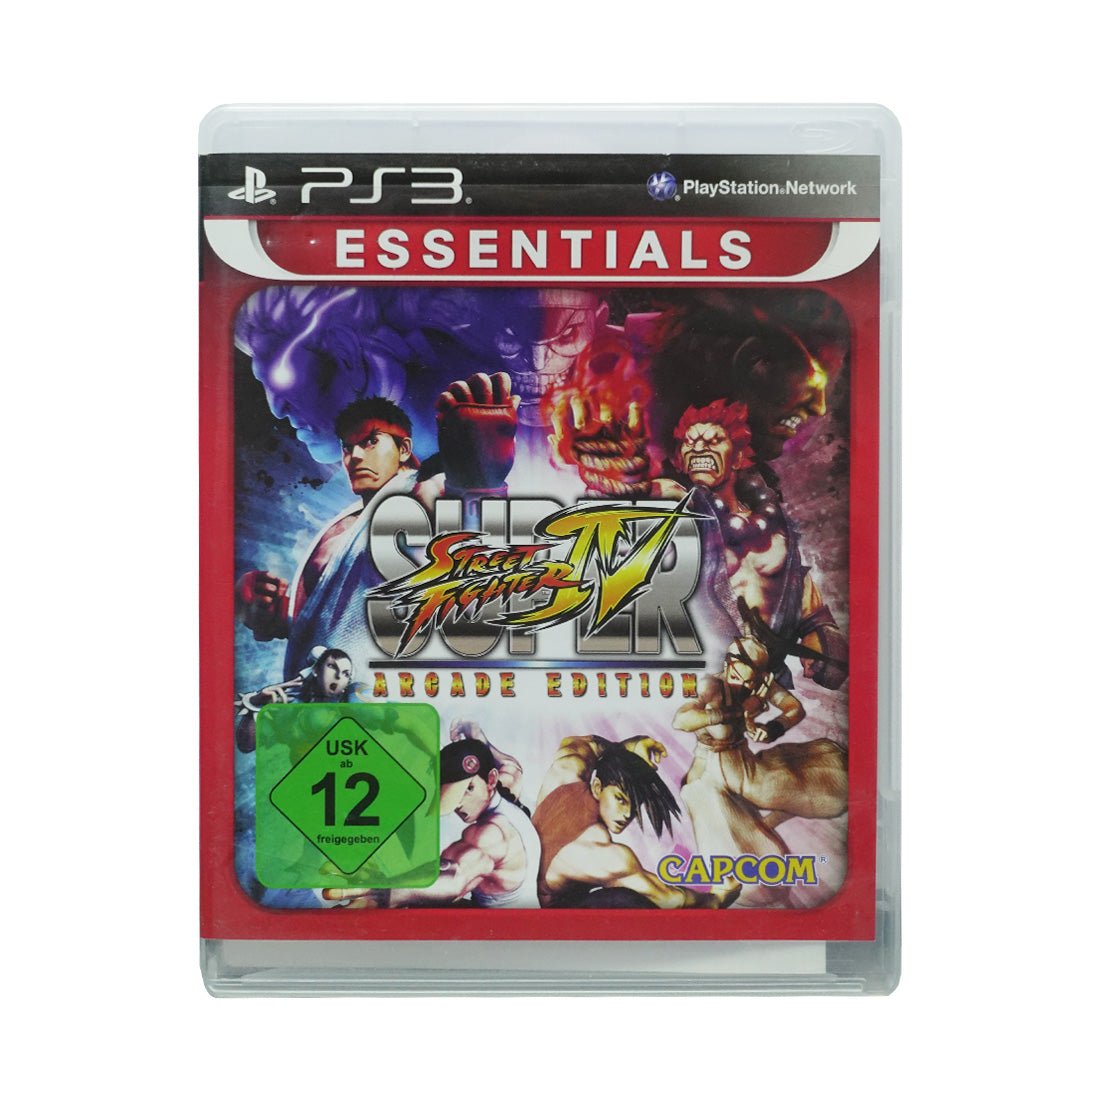 (Pre-Owned) Street Fighter IV - PlayStation 3 - ريترو - Store 974 | ستور ٩٧٤